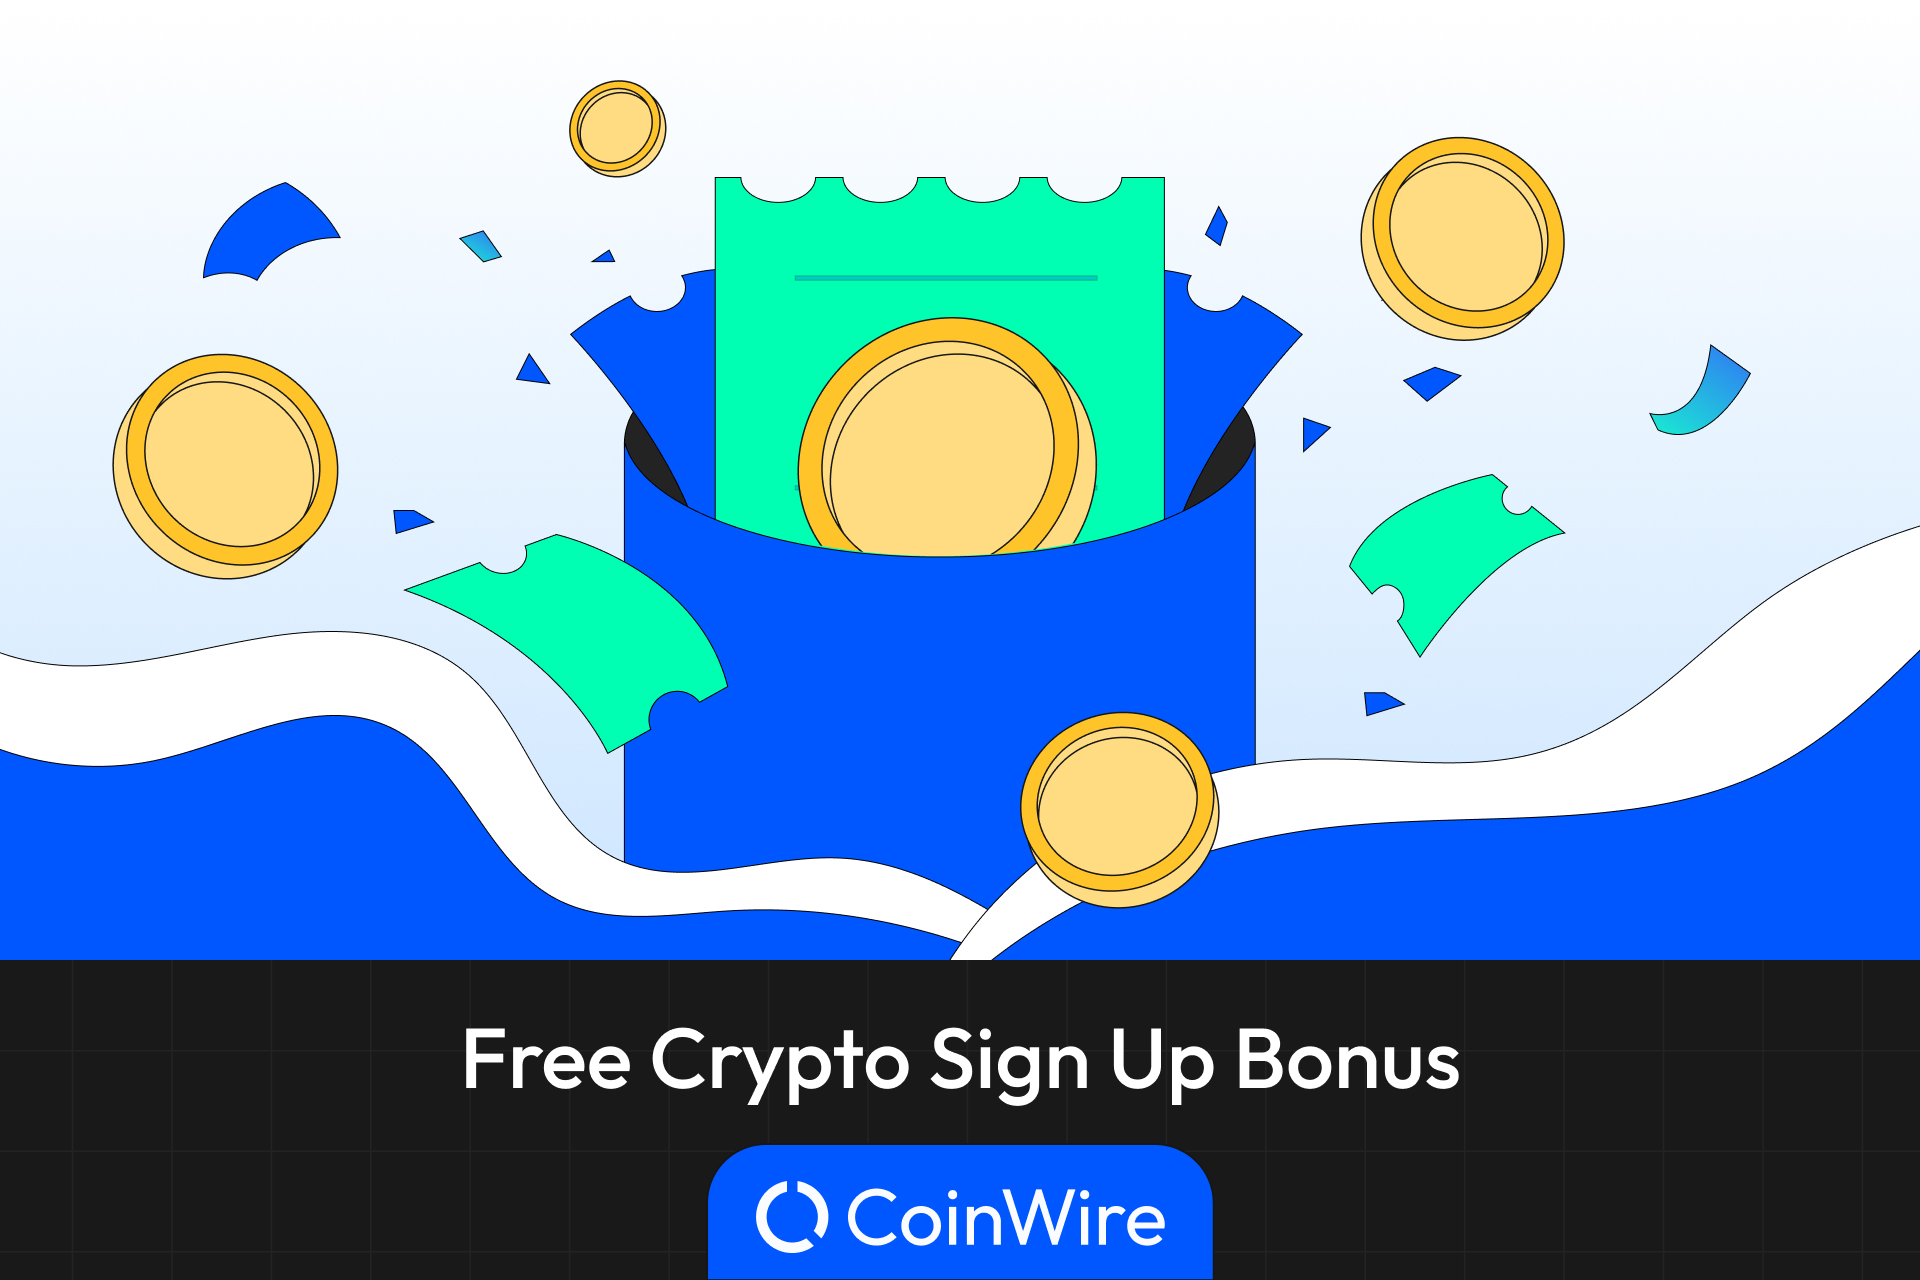 7 Best Ways To Earn Free Crypto In 